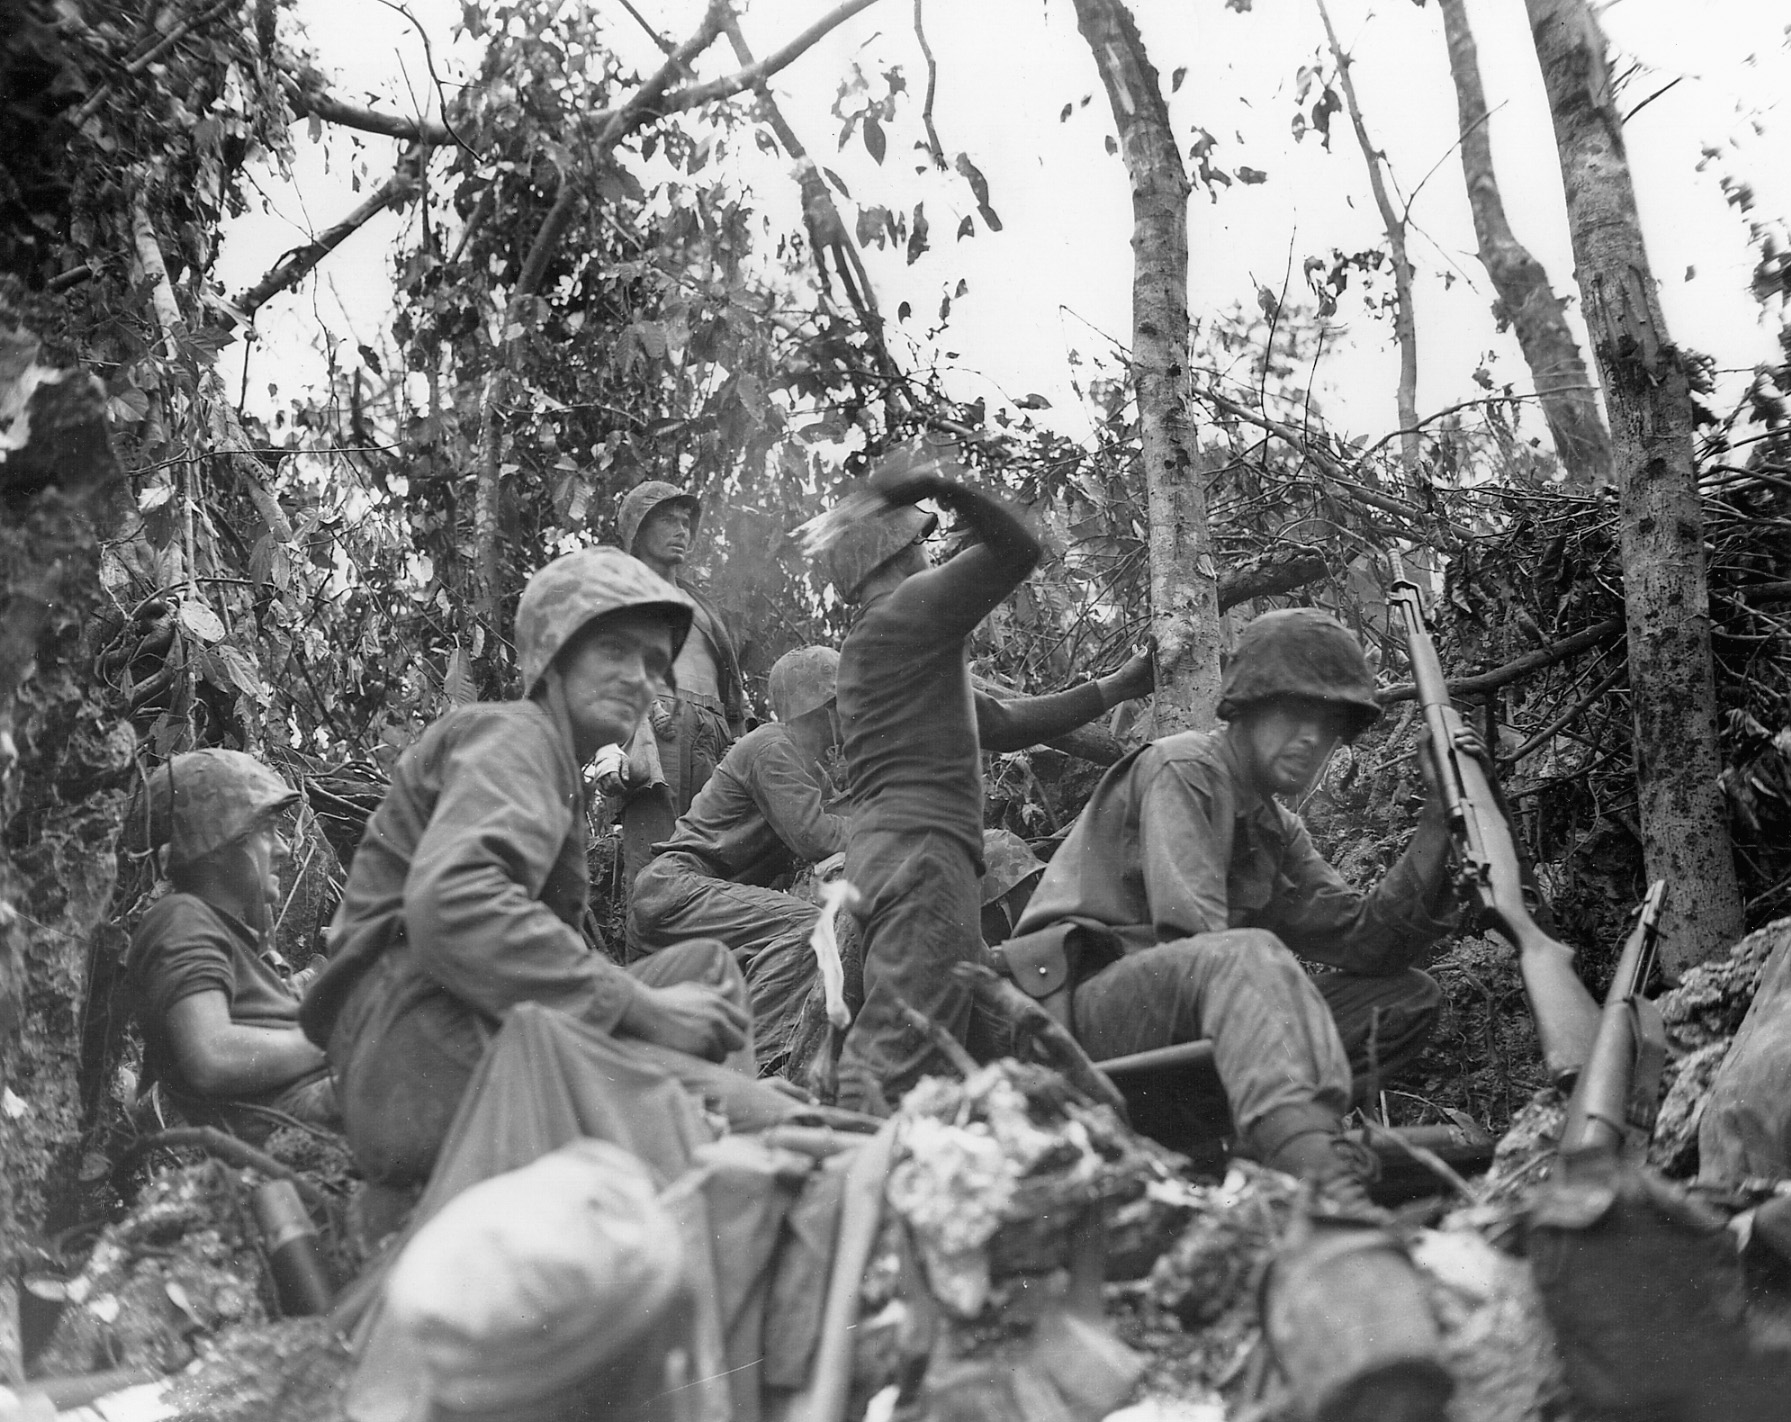 During one of many close quarters engagements in the dense jungle of Peleliu, Marines hurl molotov cocktails towards enemy positions along a bitterly contested elevation nicknamed “Suicide Ridge.”